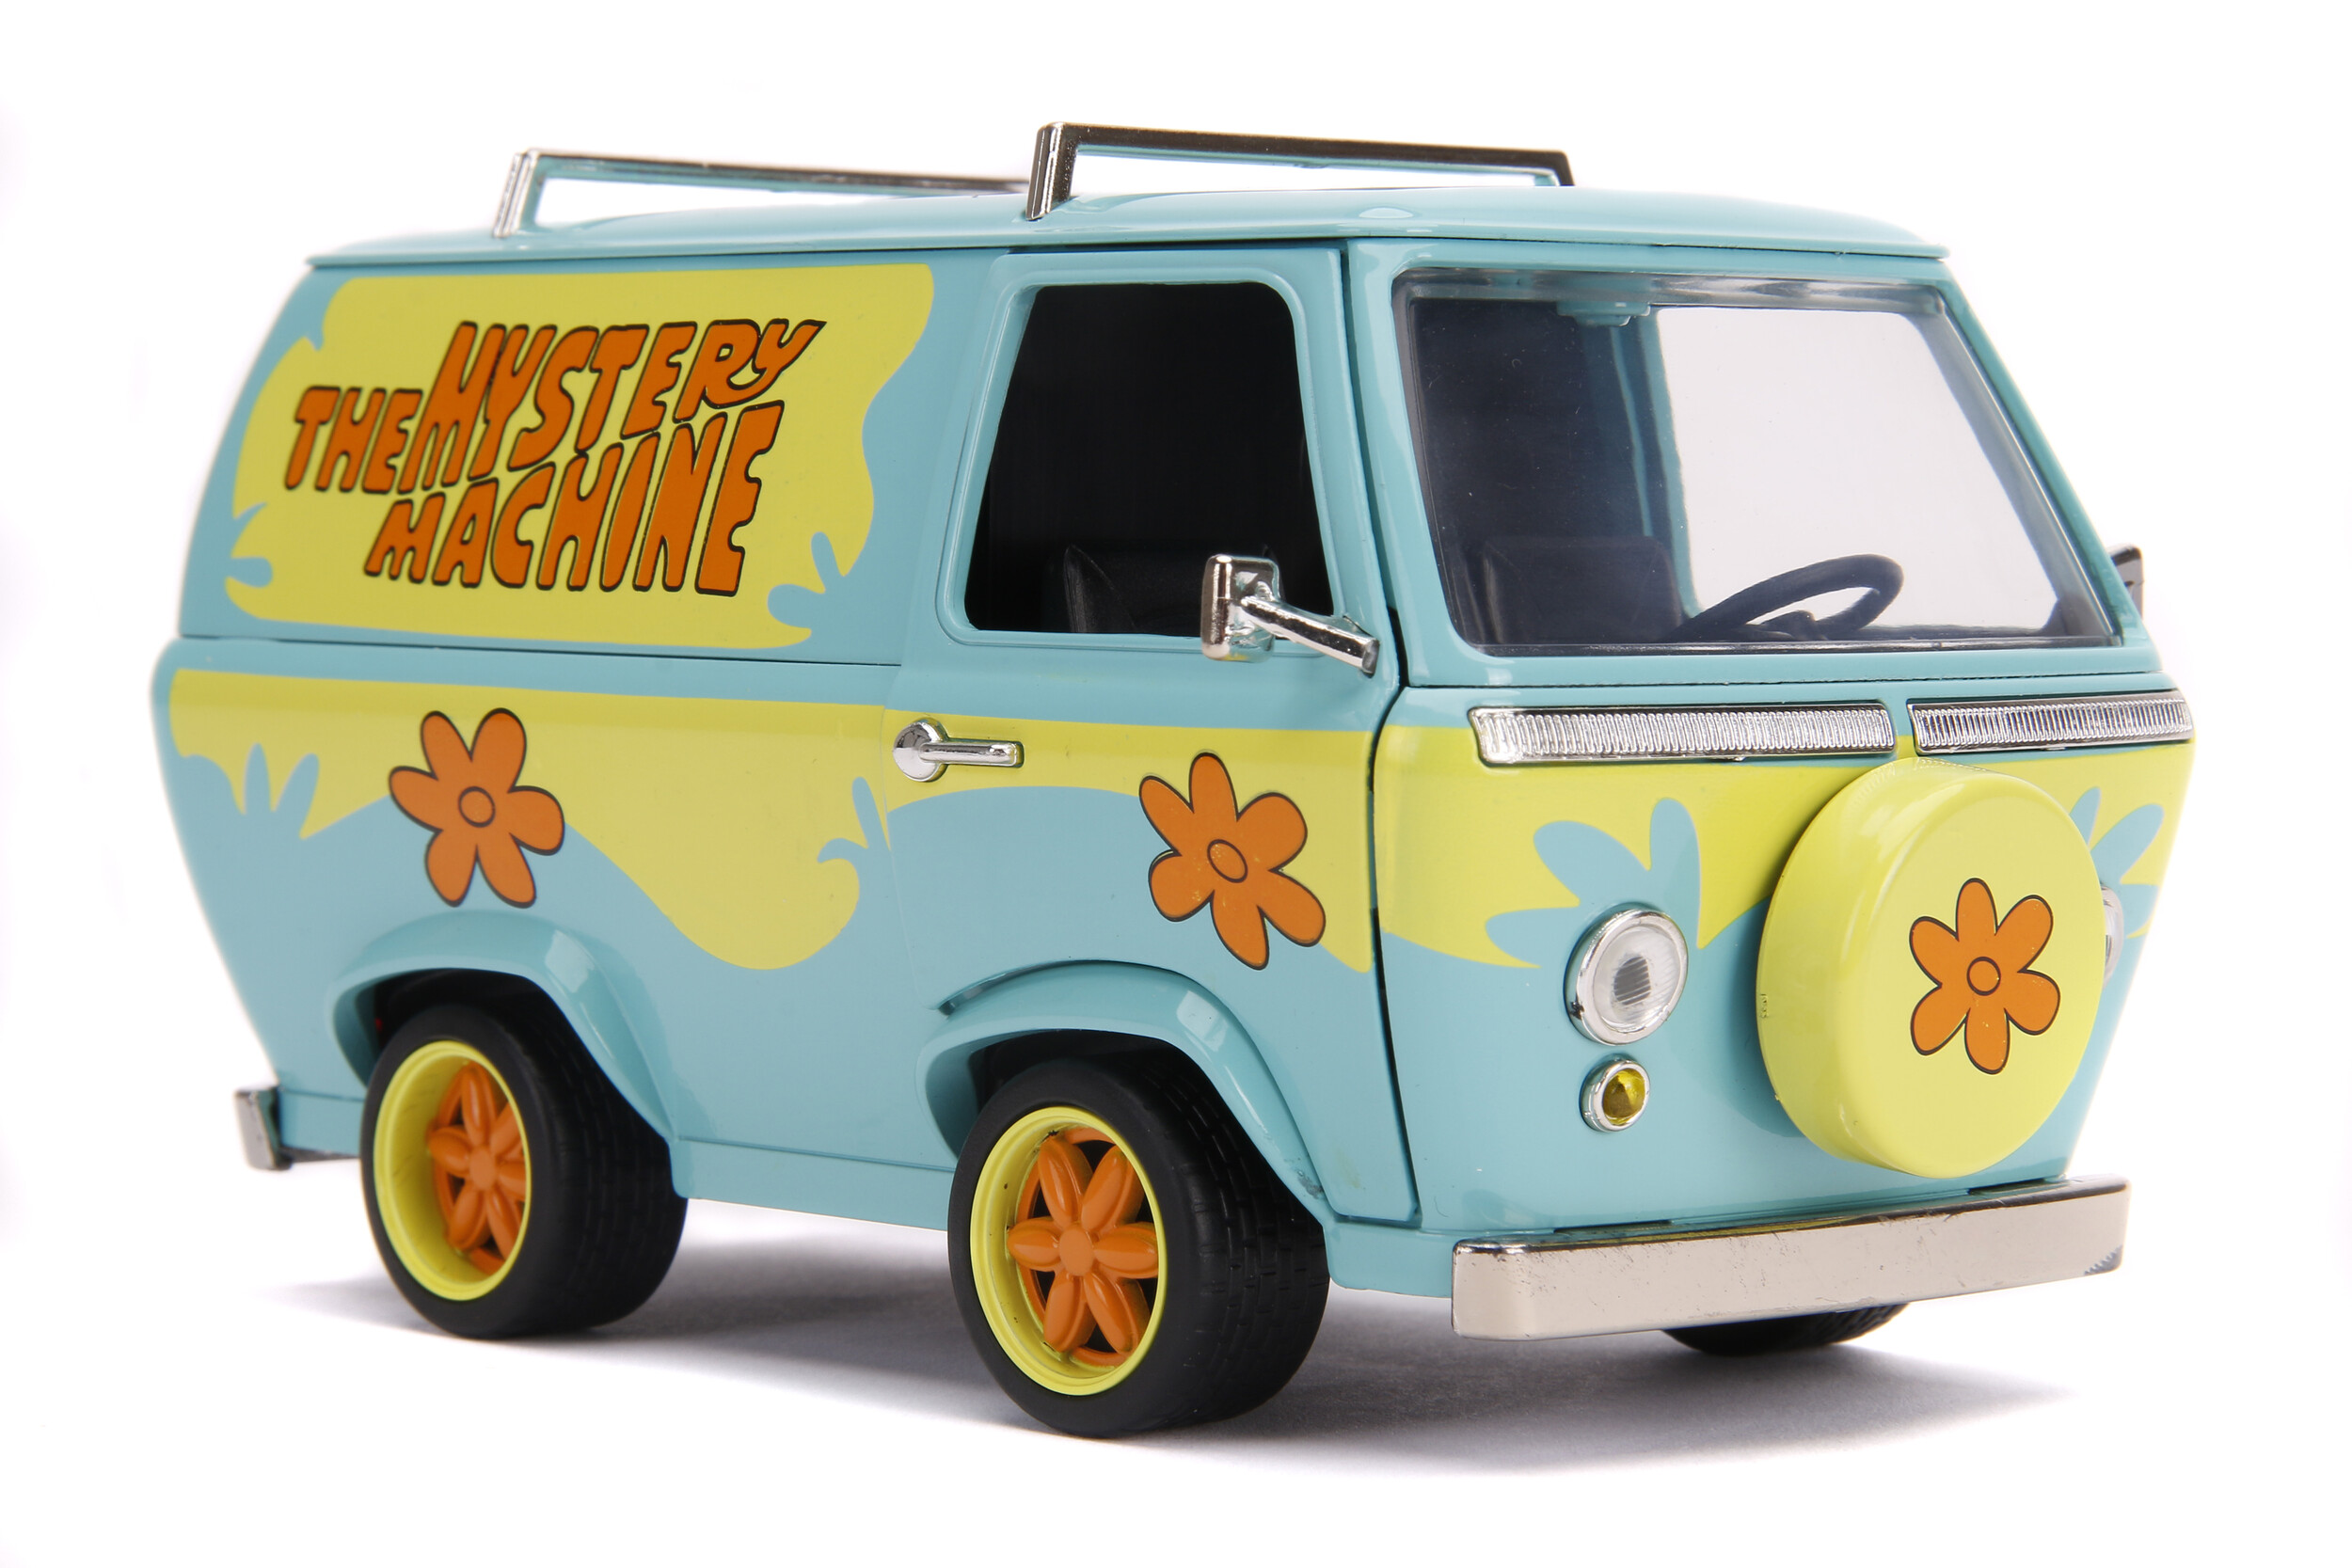 Accessible Luxury Jada Hollywood Rides Scooby Doo 1:32 Scale Mystery ...